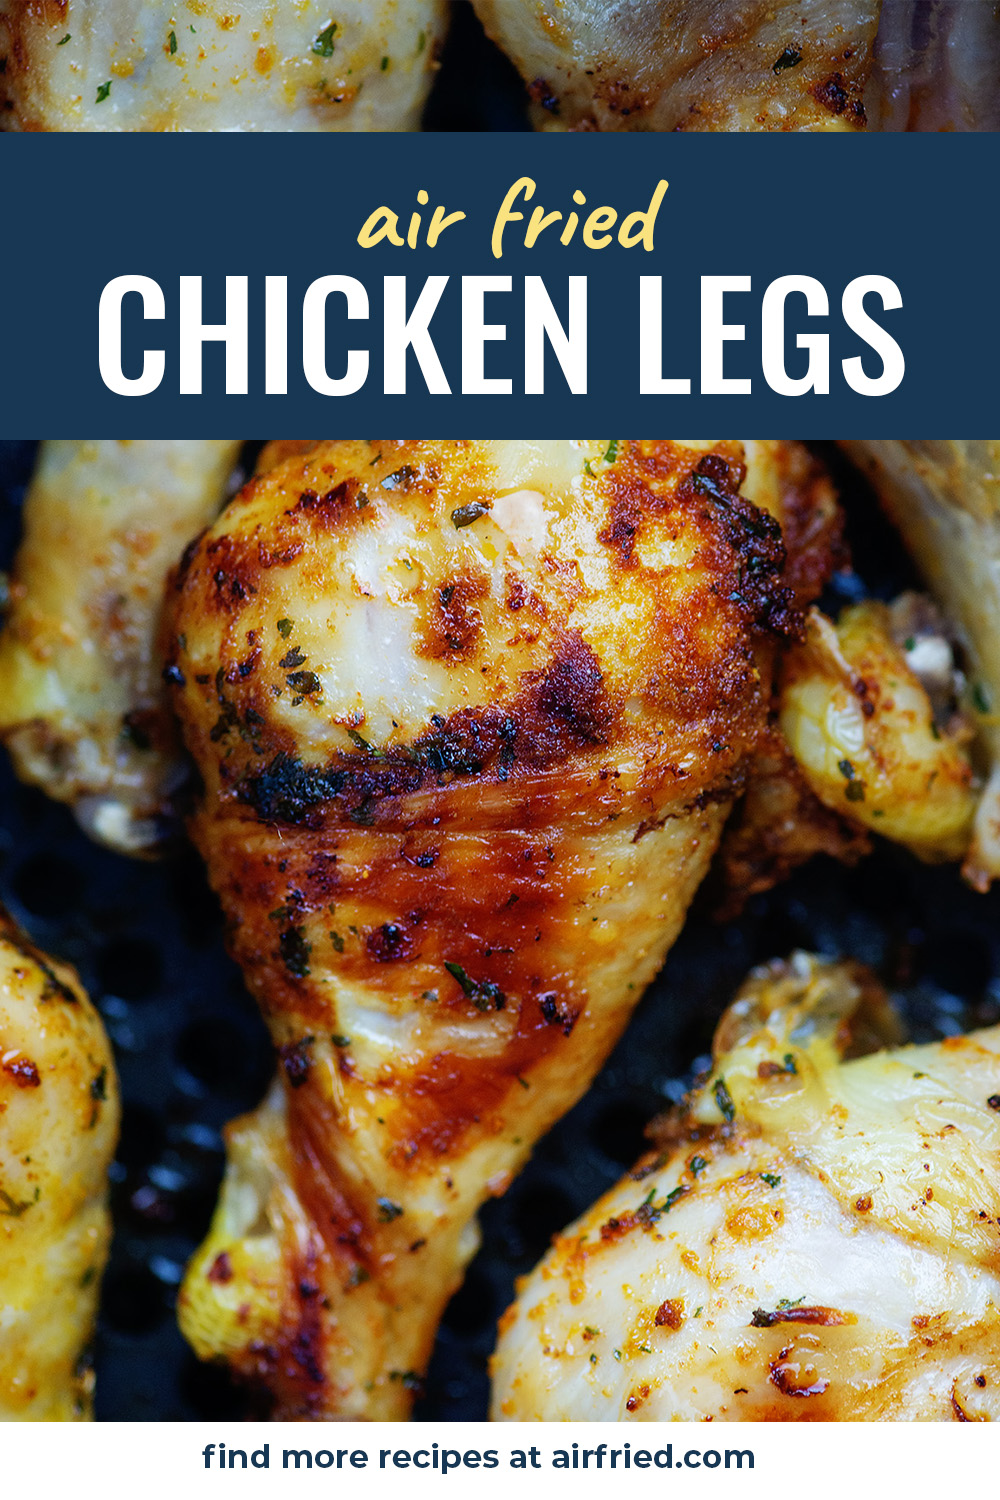 Air fried chicken legs are so easy and so good!  